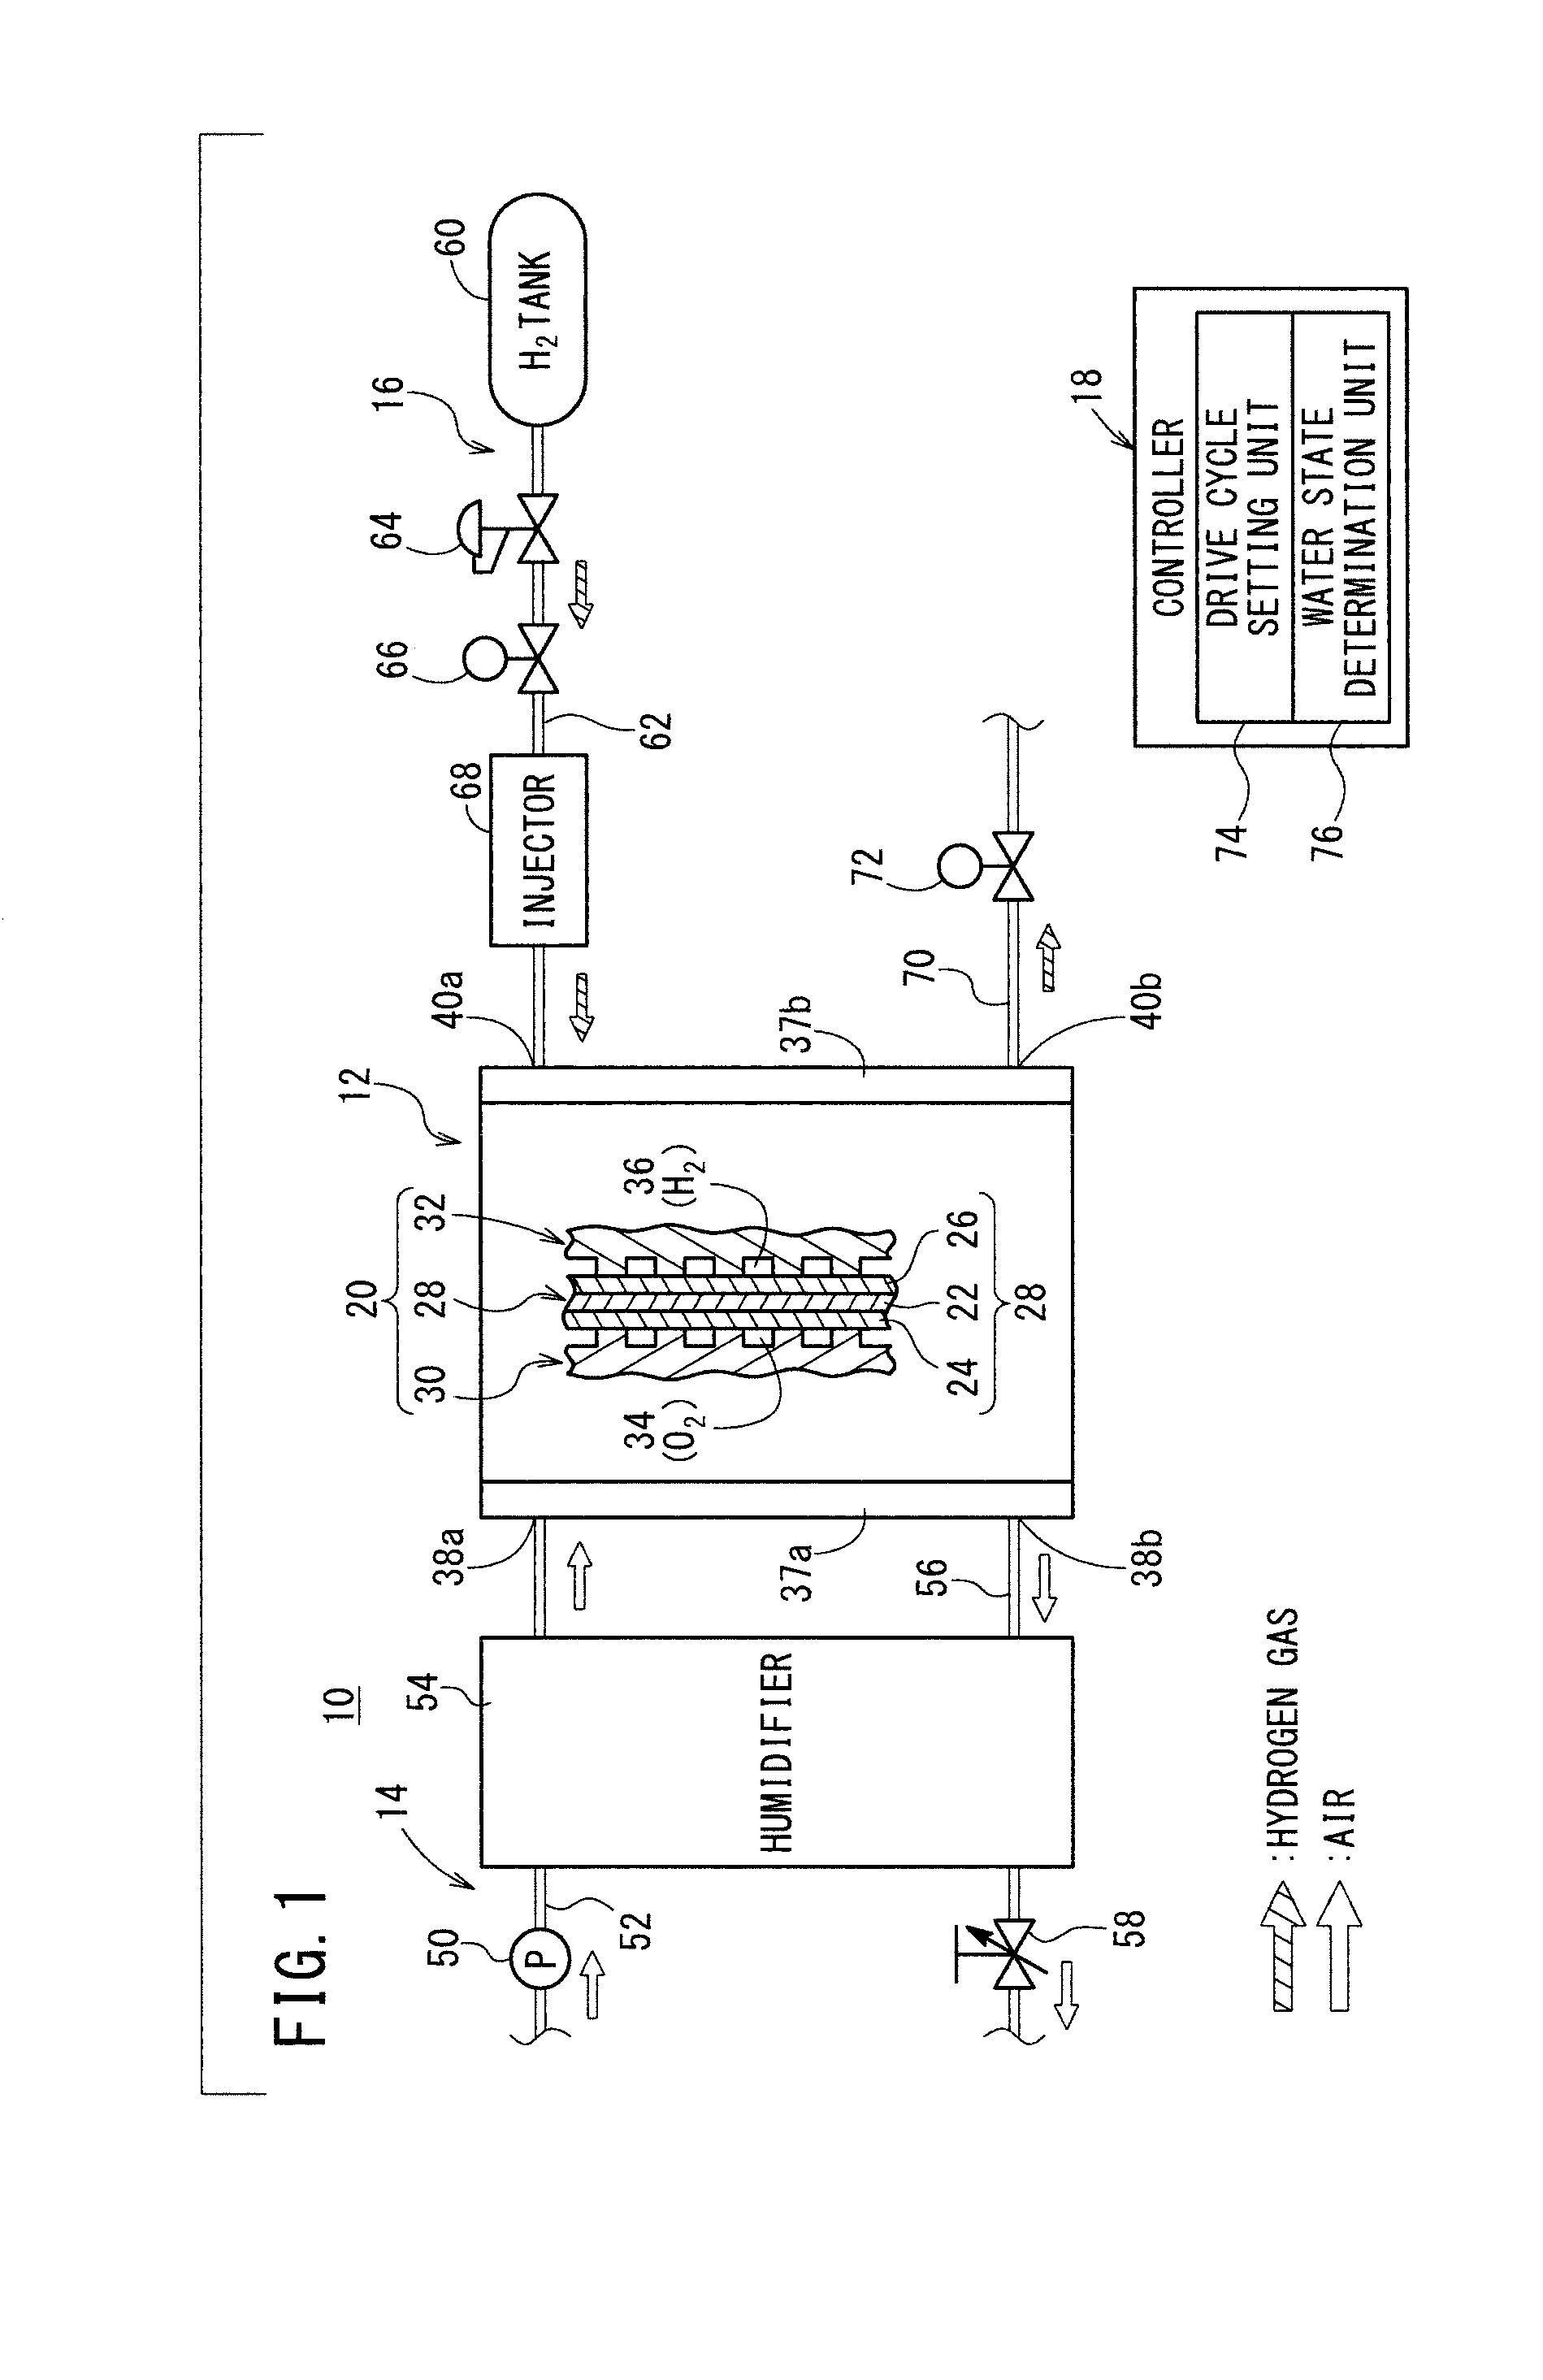 Fuel cell system and method of controlling the fuel cell system